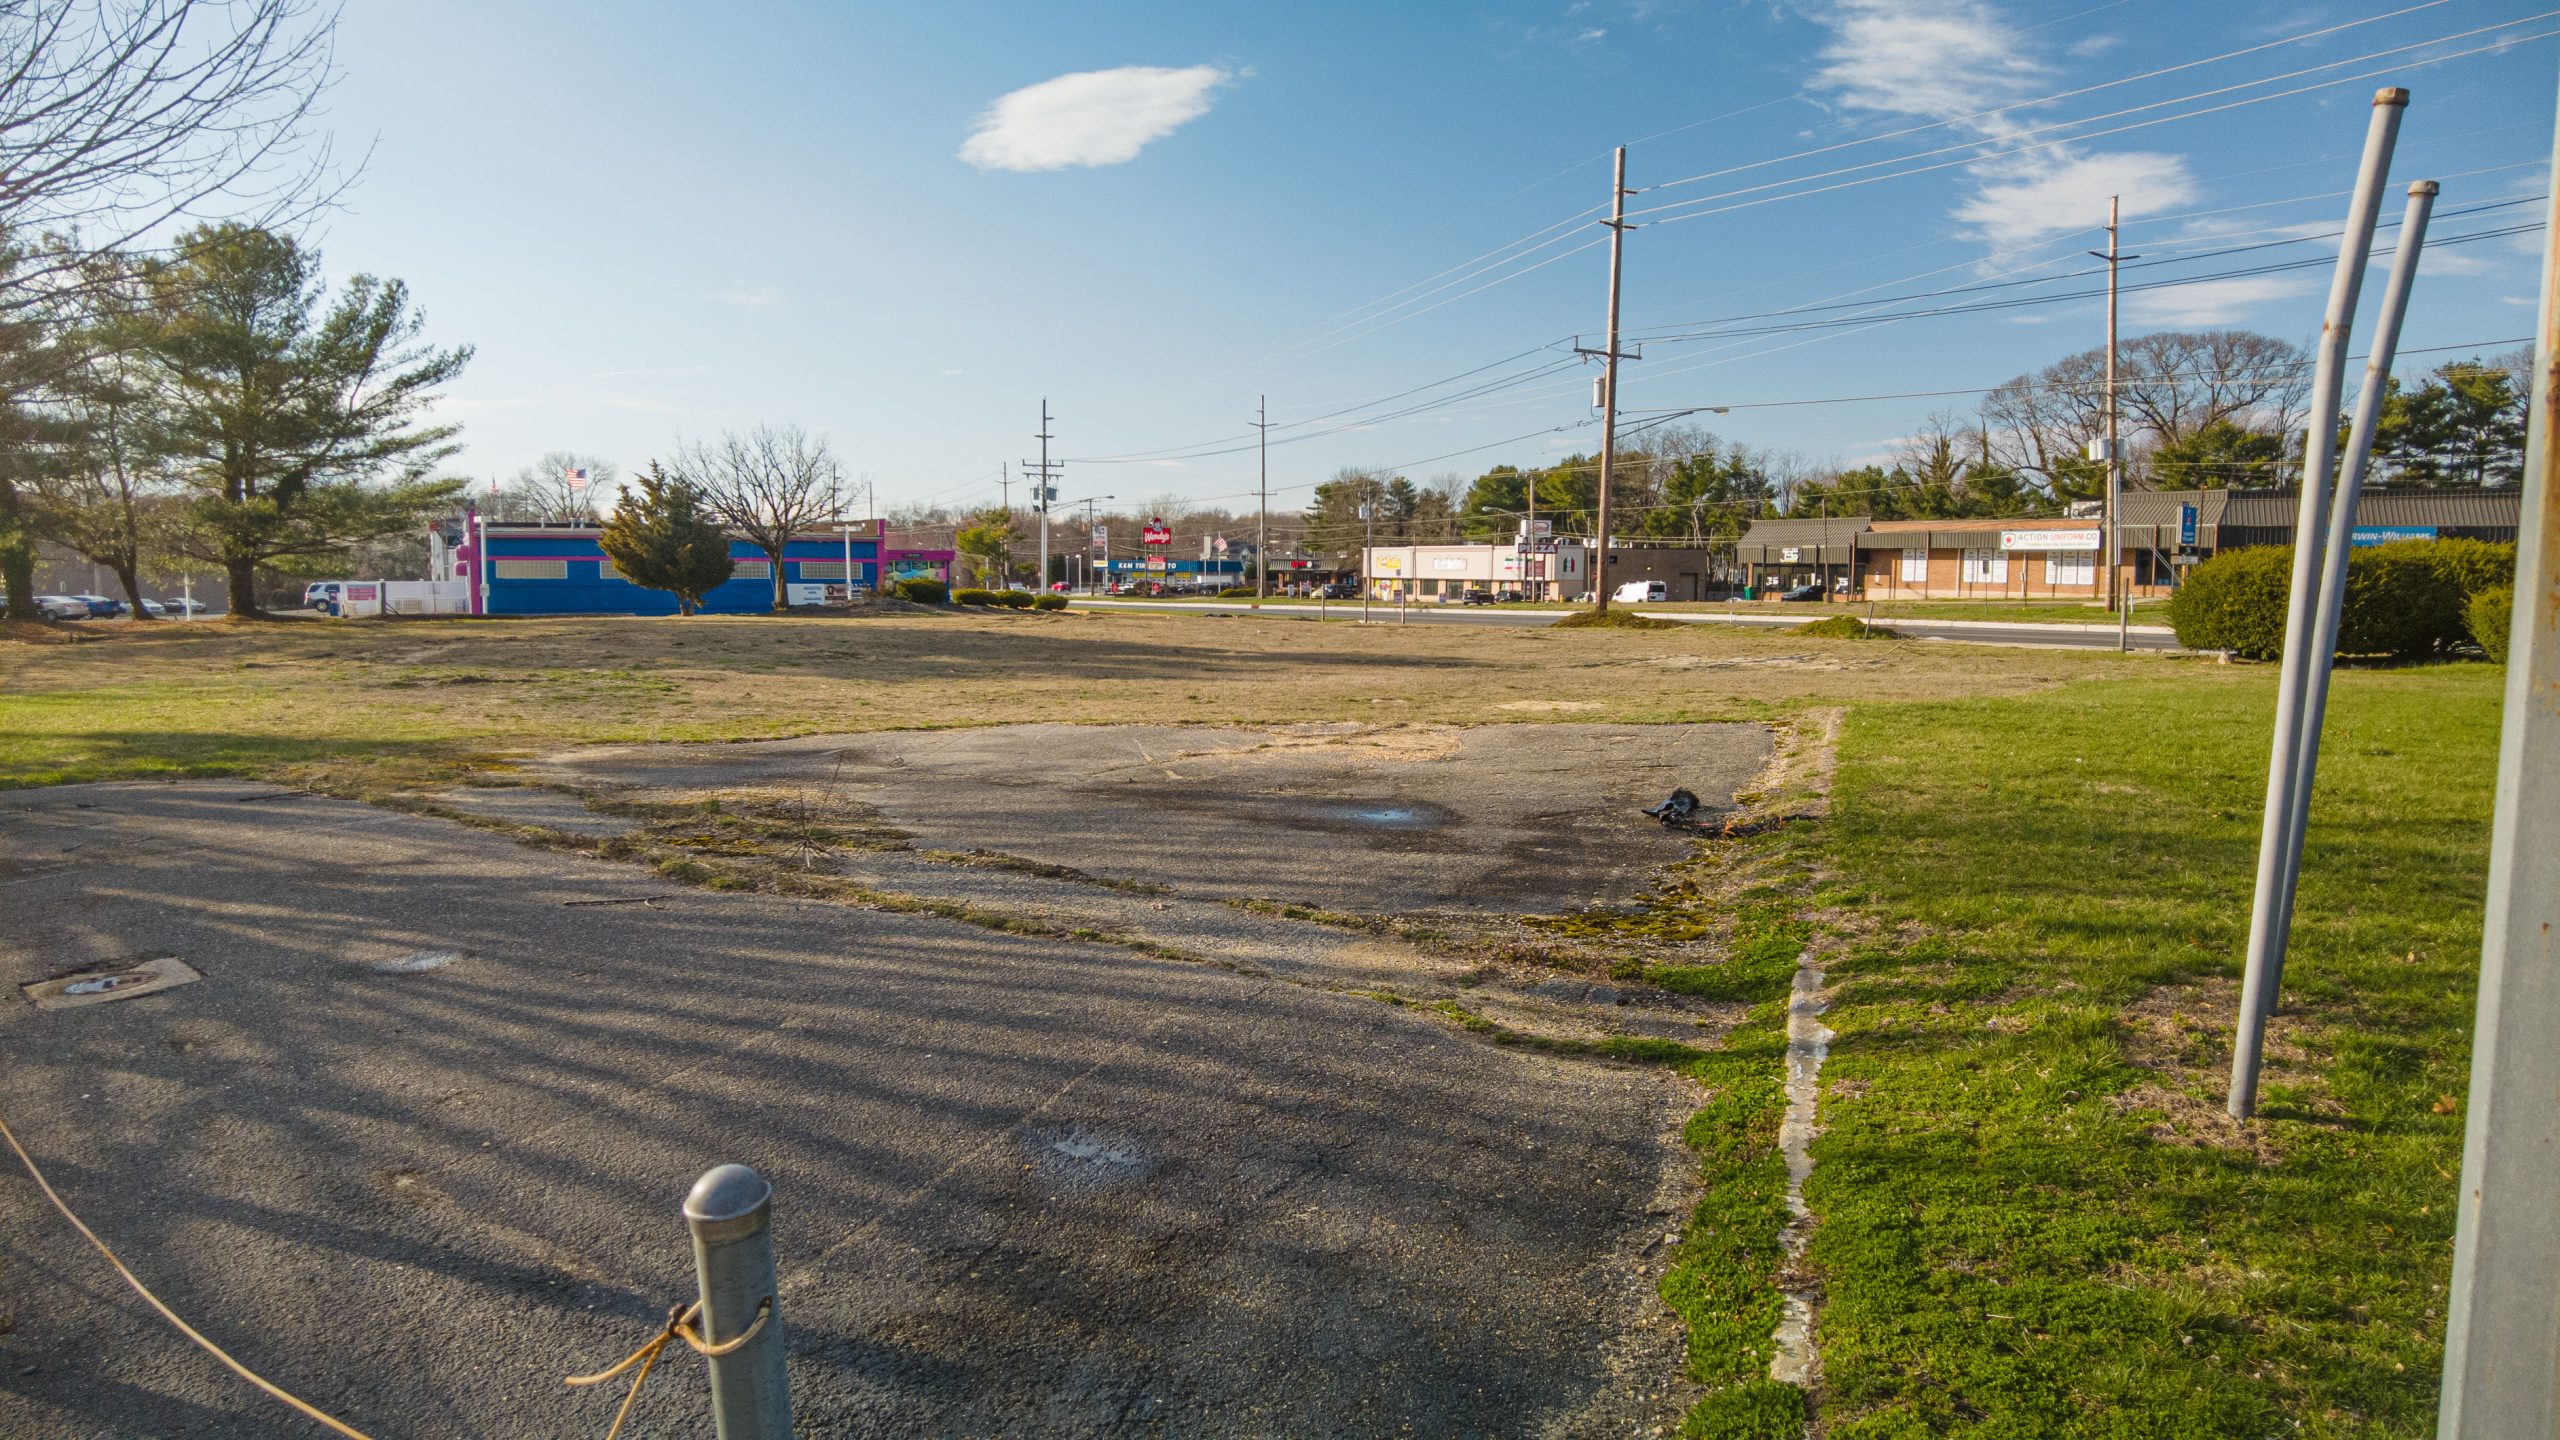 The site of a proposed Chipotle restaurant at 465 Route 37 East, March 2022. (Photo: Daniel Nee)